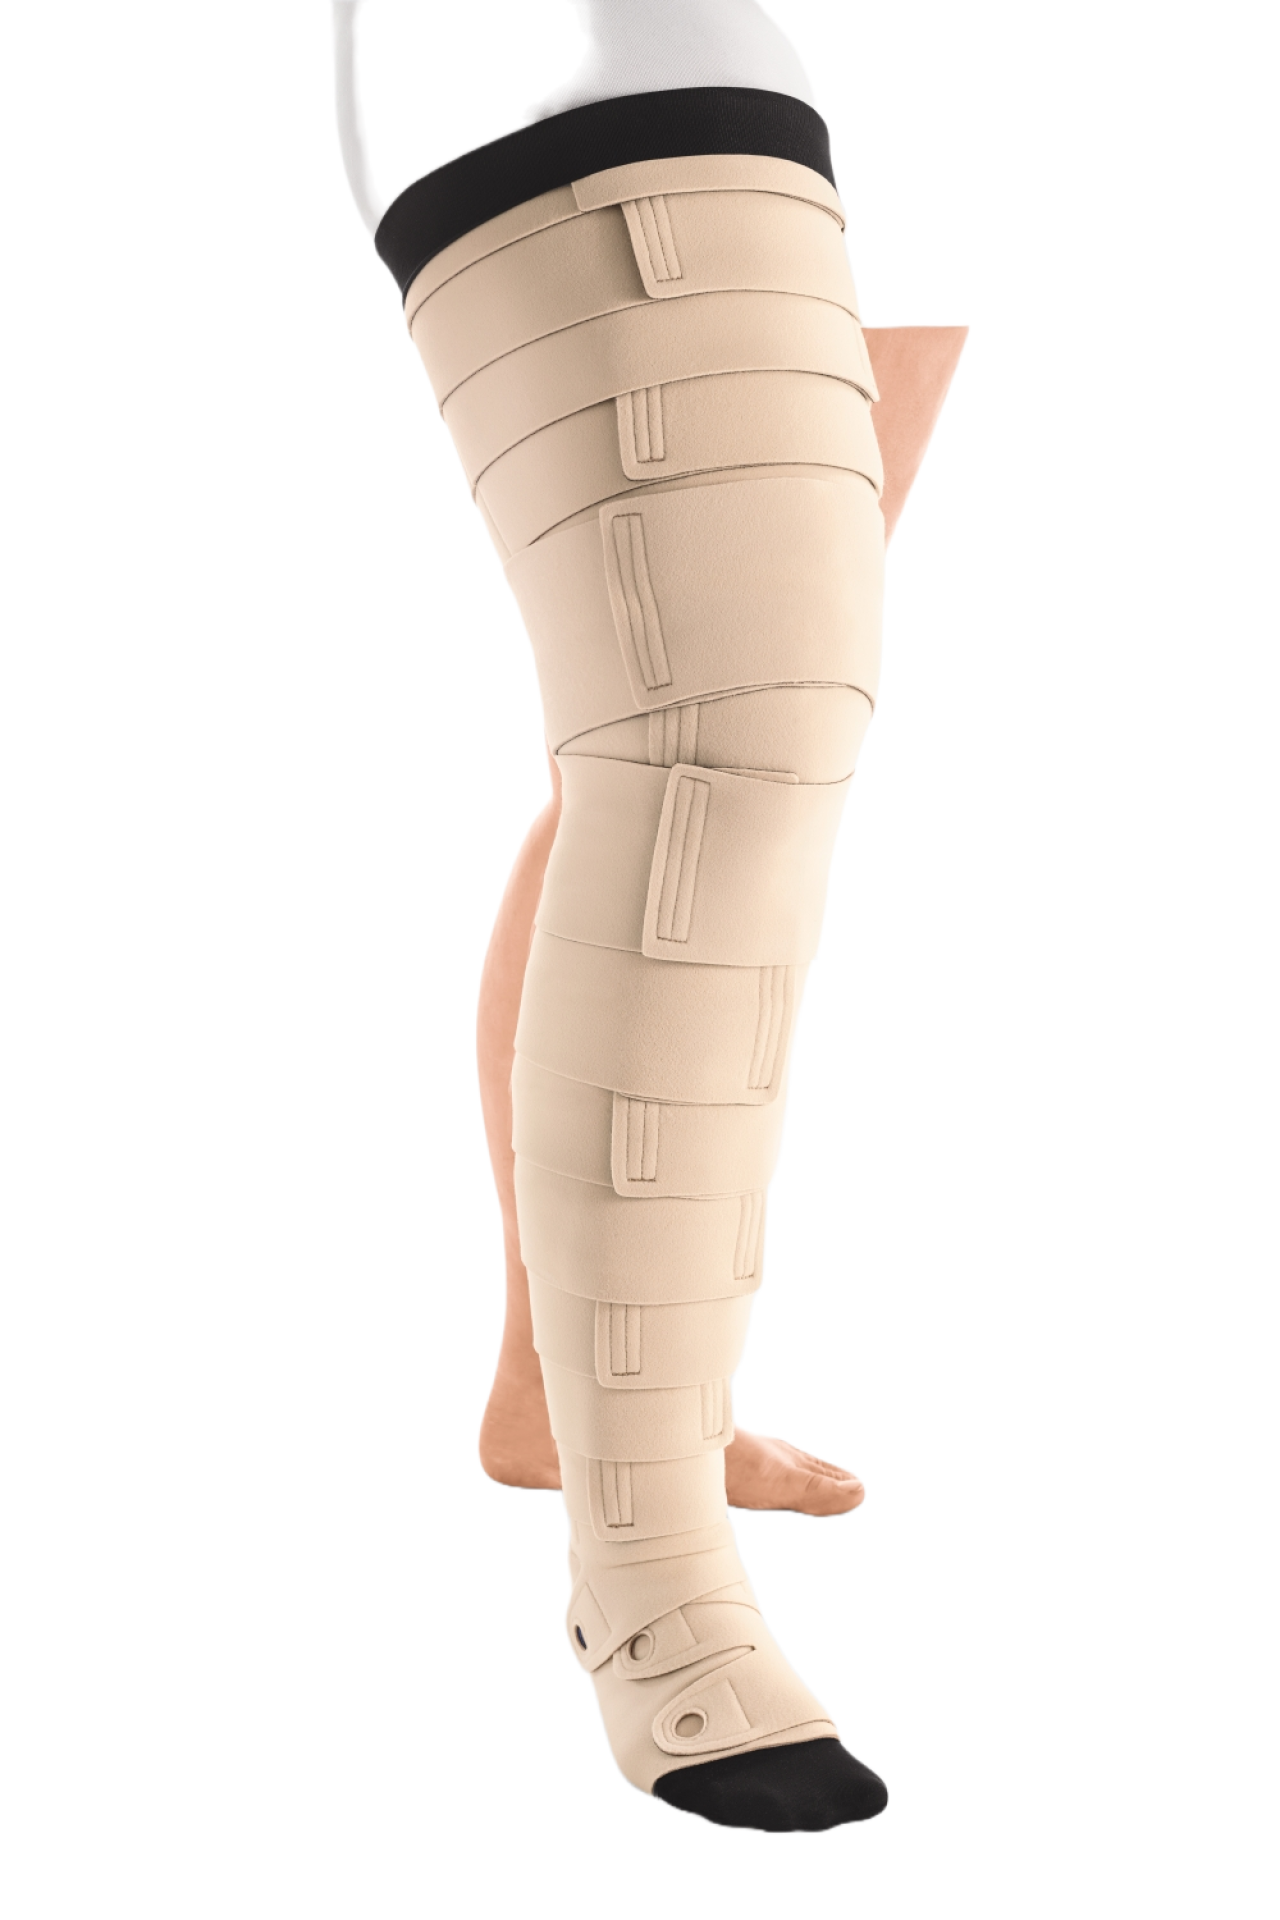  circaid Reduction Kit Lower Leg Built-in-Tension System  Compression Treatment : Health & Household